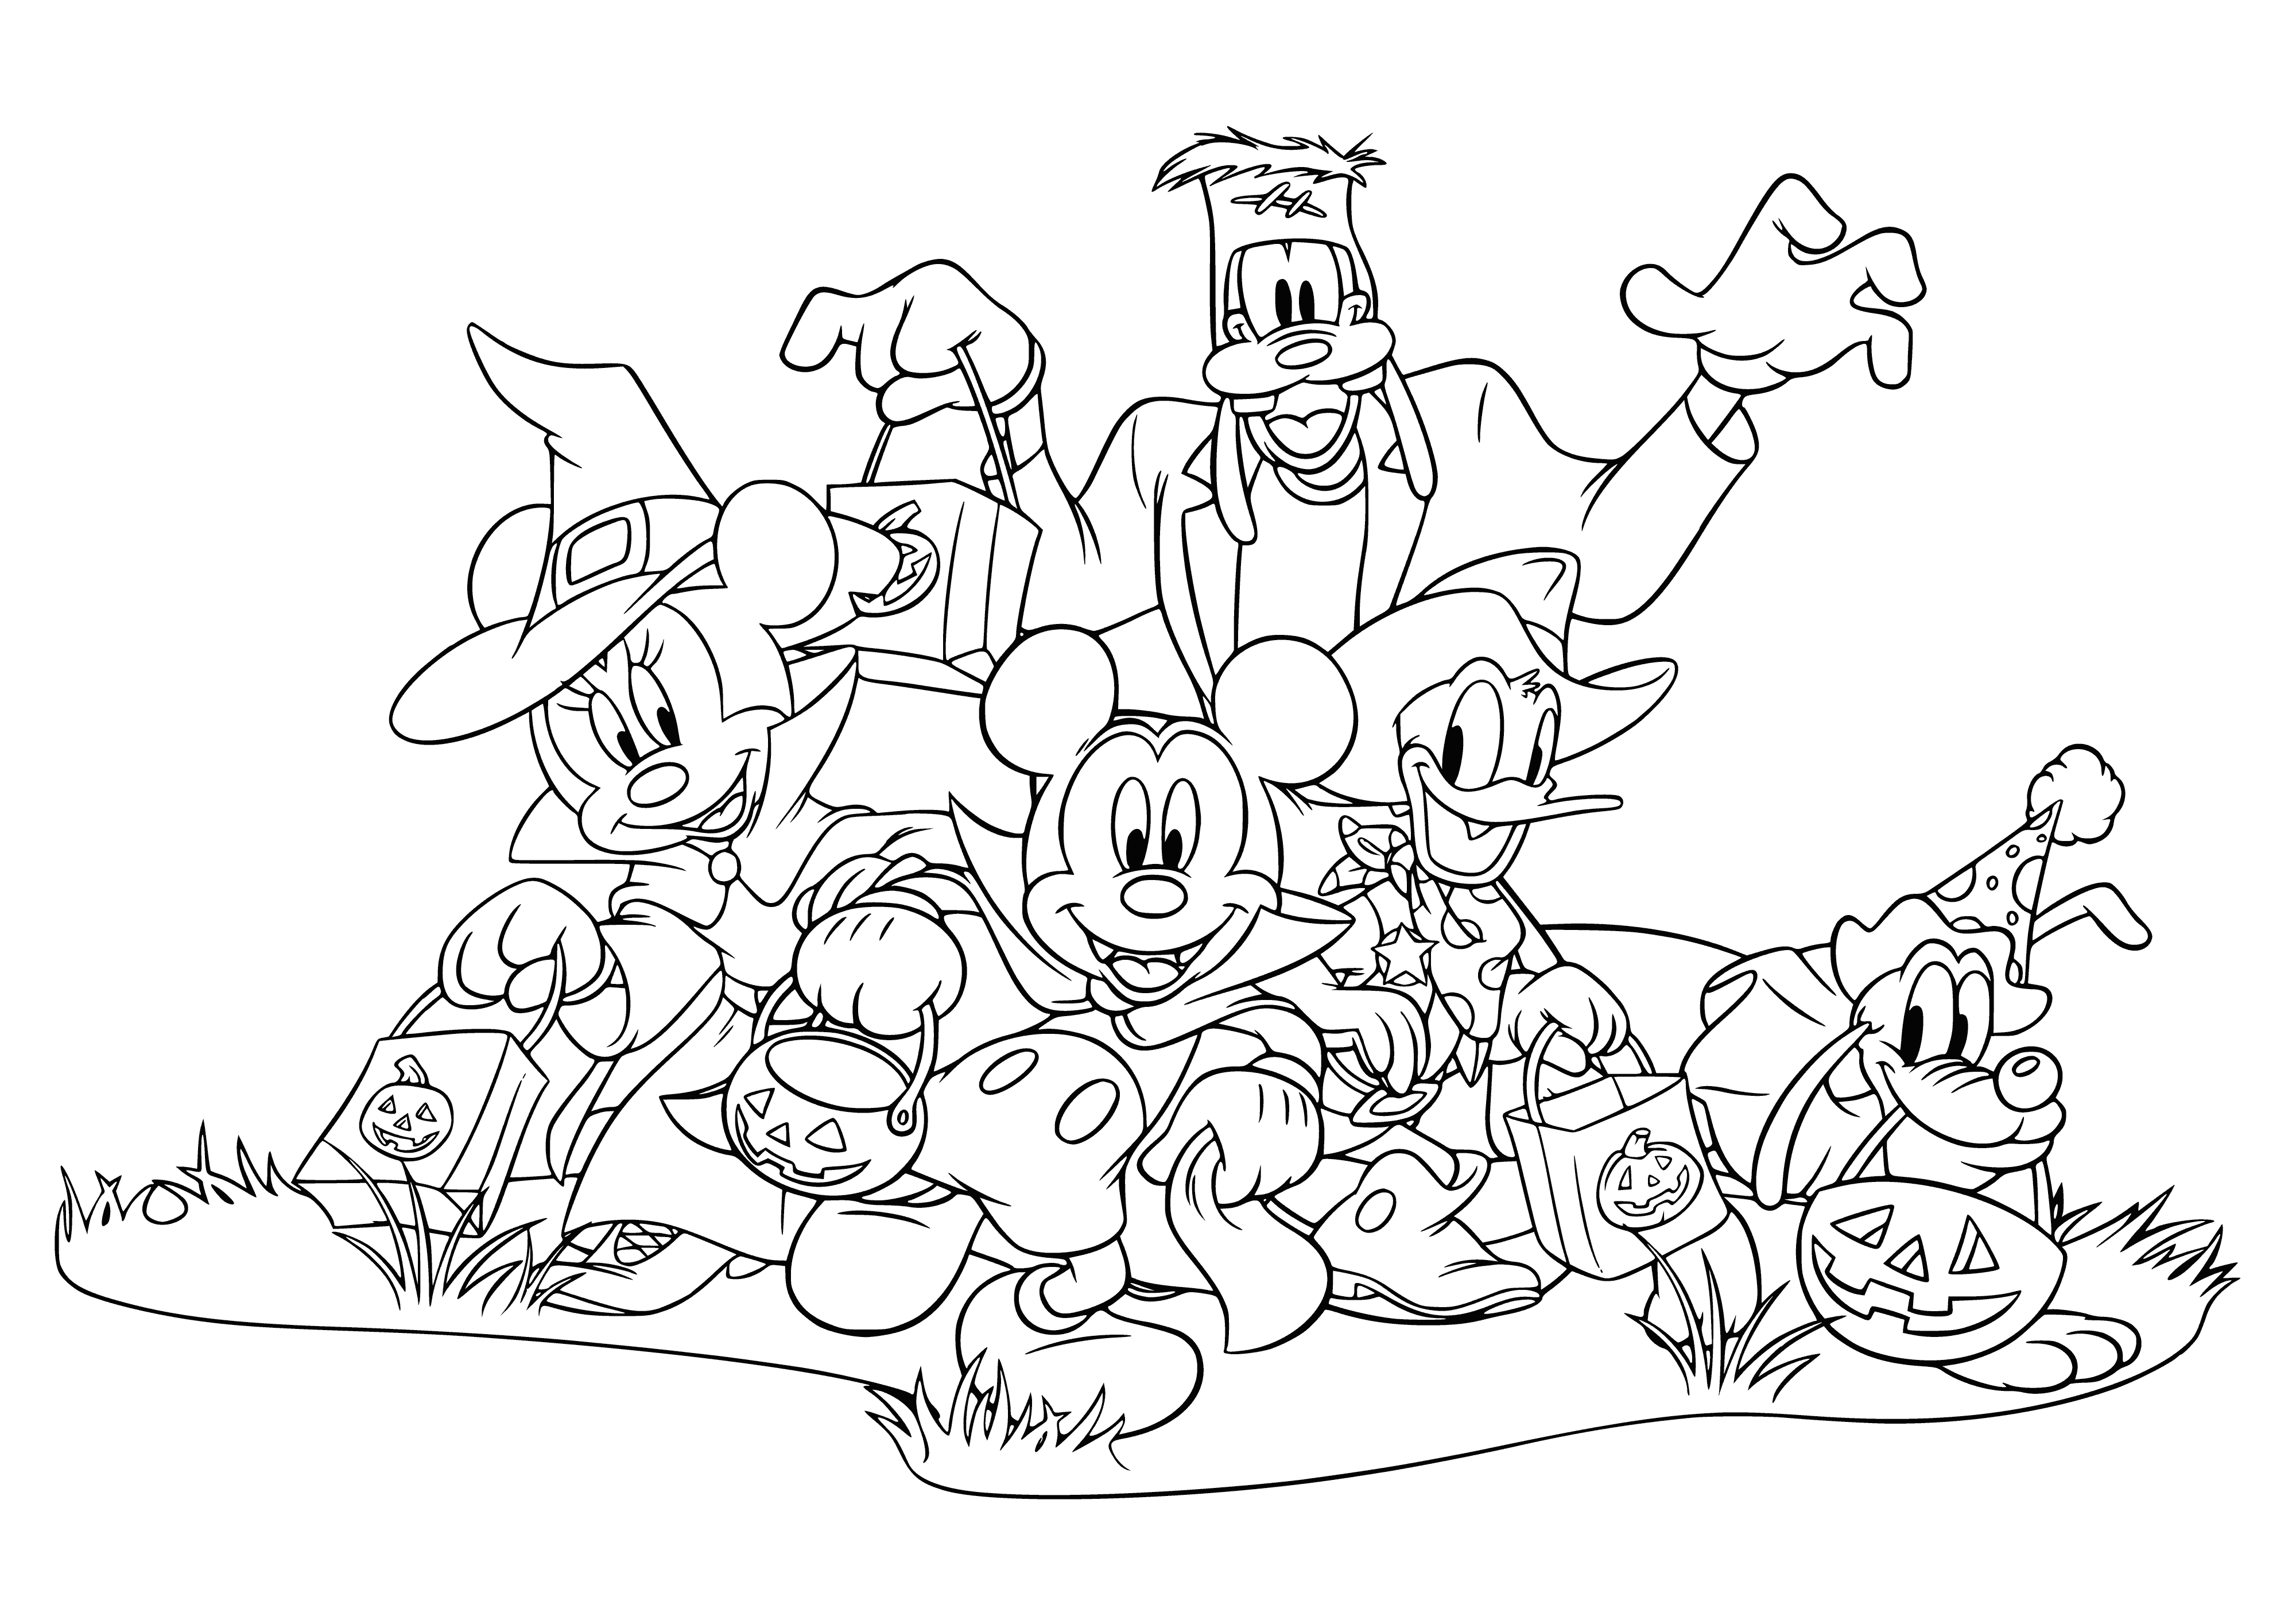 Mickey Mouse's Halloween Friends coloring page